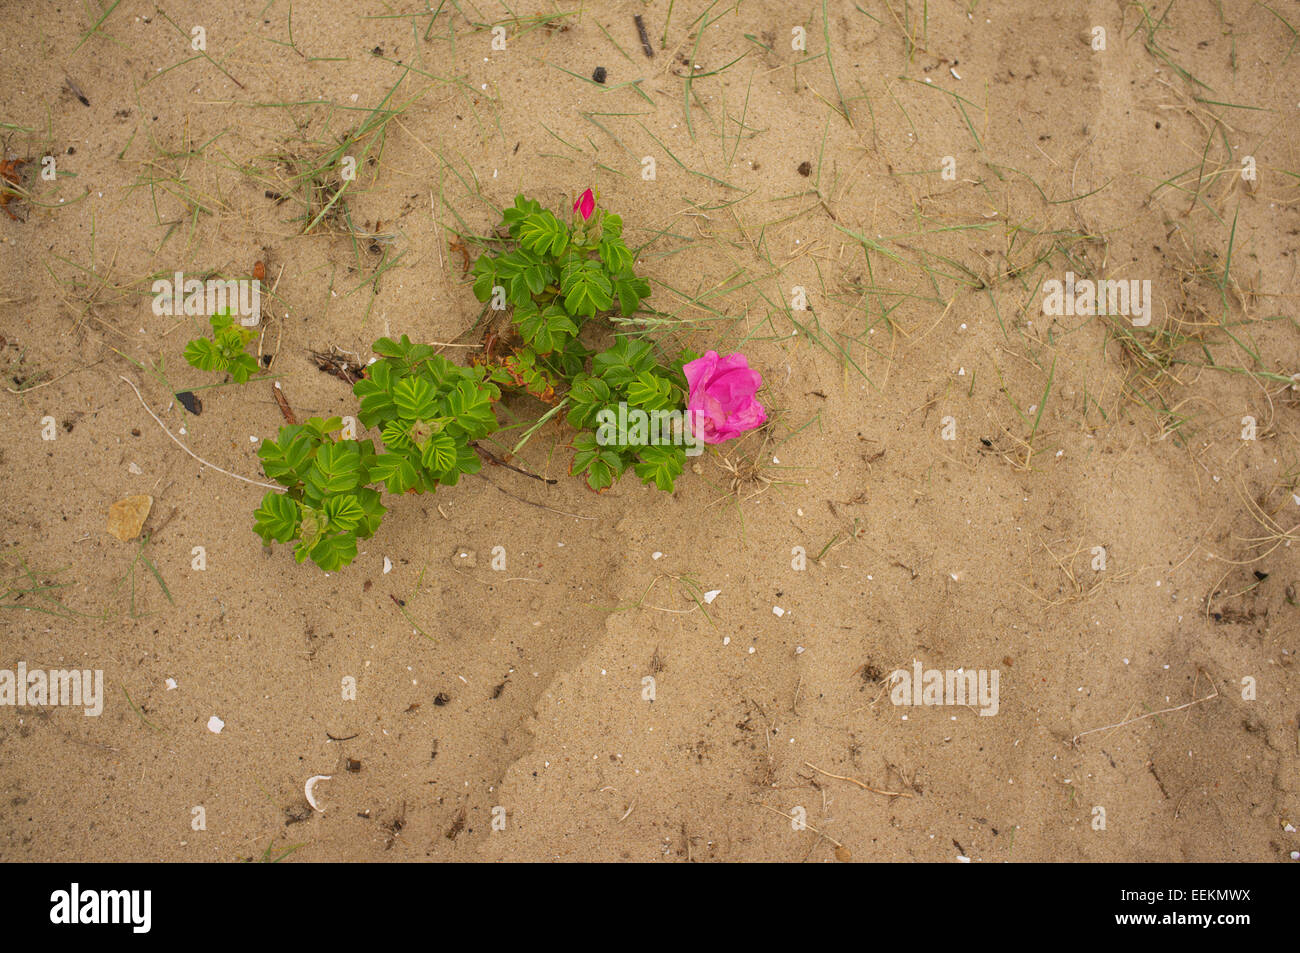 Plant with pink flower growing in sand Stock Photo